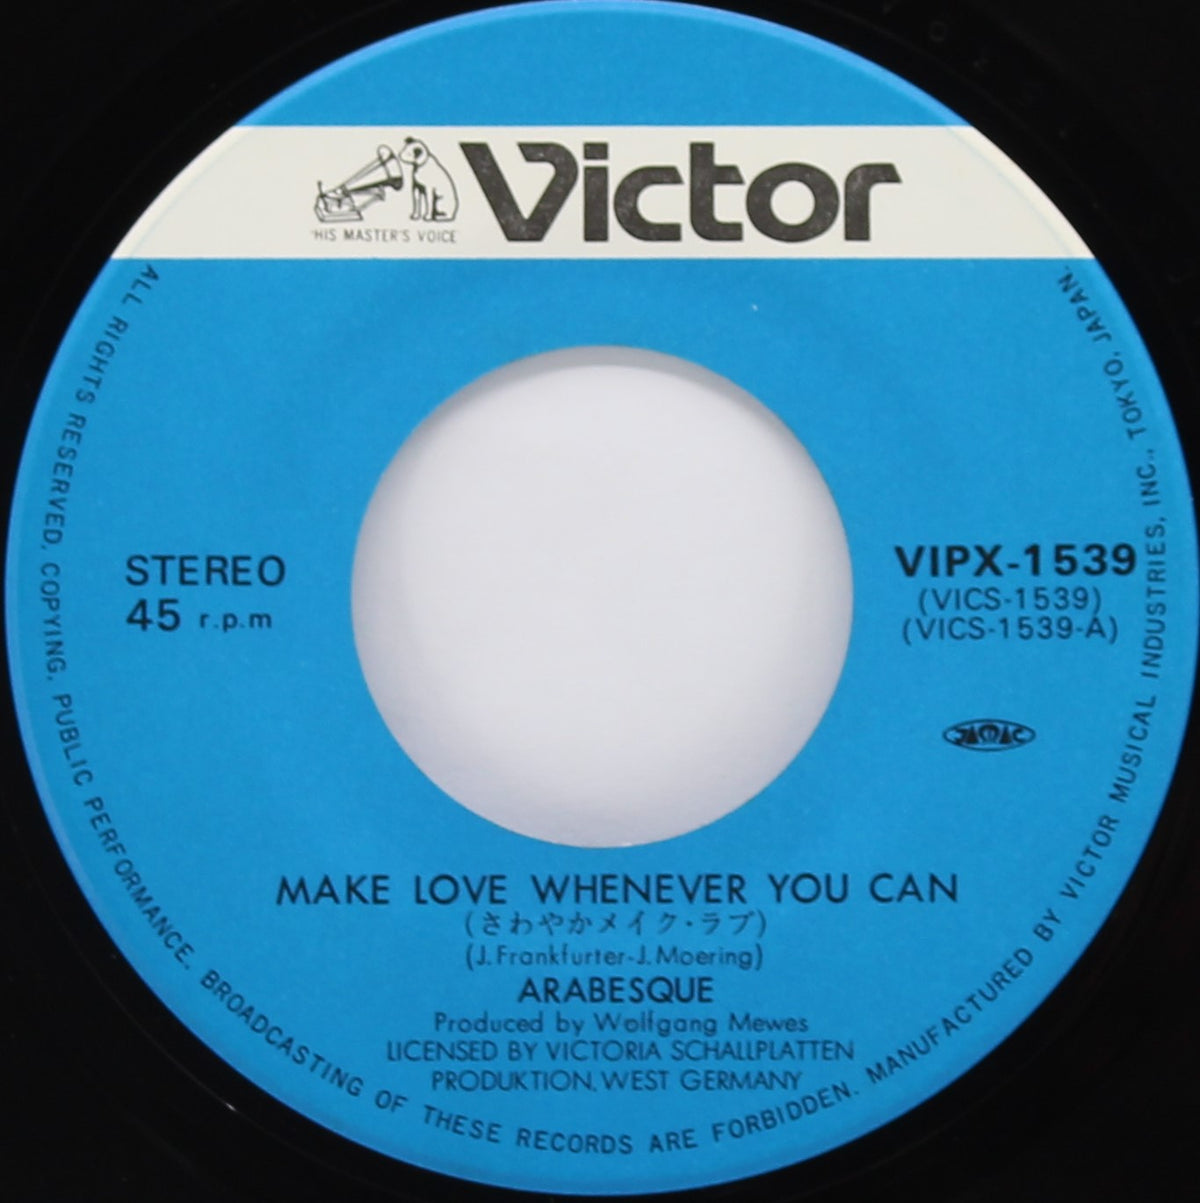 Arabesque (Sandra) – さやわかメイク･ラブ Make Love Whenever You Can / ひとりぼっちの朝食 I Don&#39;t Wanna Have Breakfast With You, Vinyl, 7&quot;, Single, 45 RPM, Stereo, Japan 1980